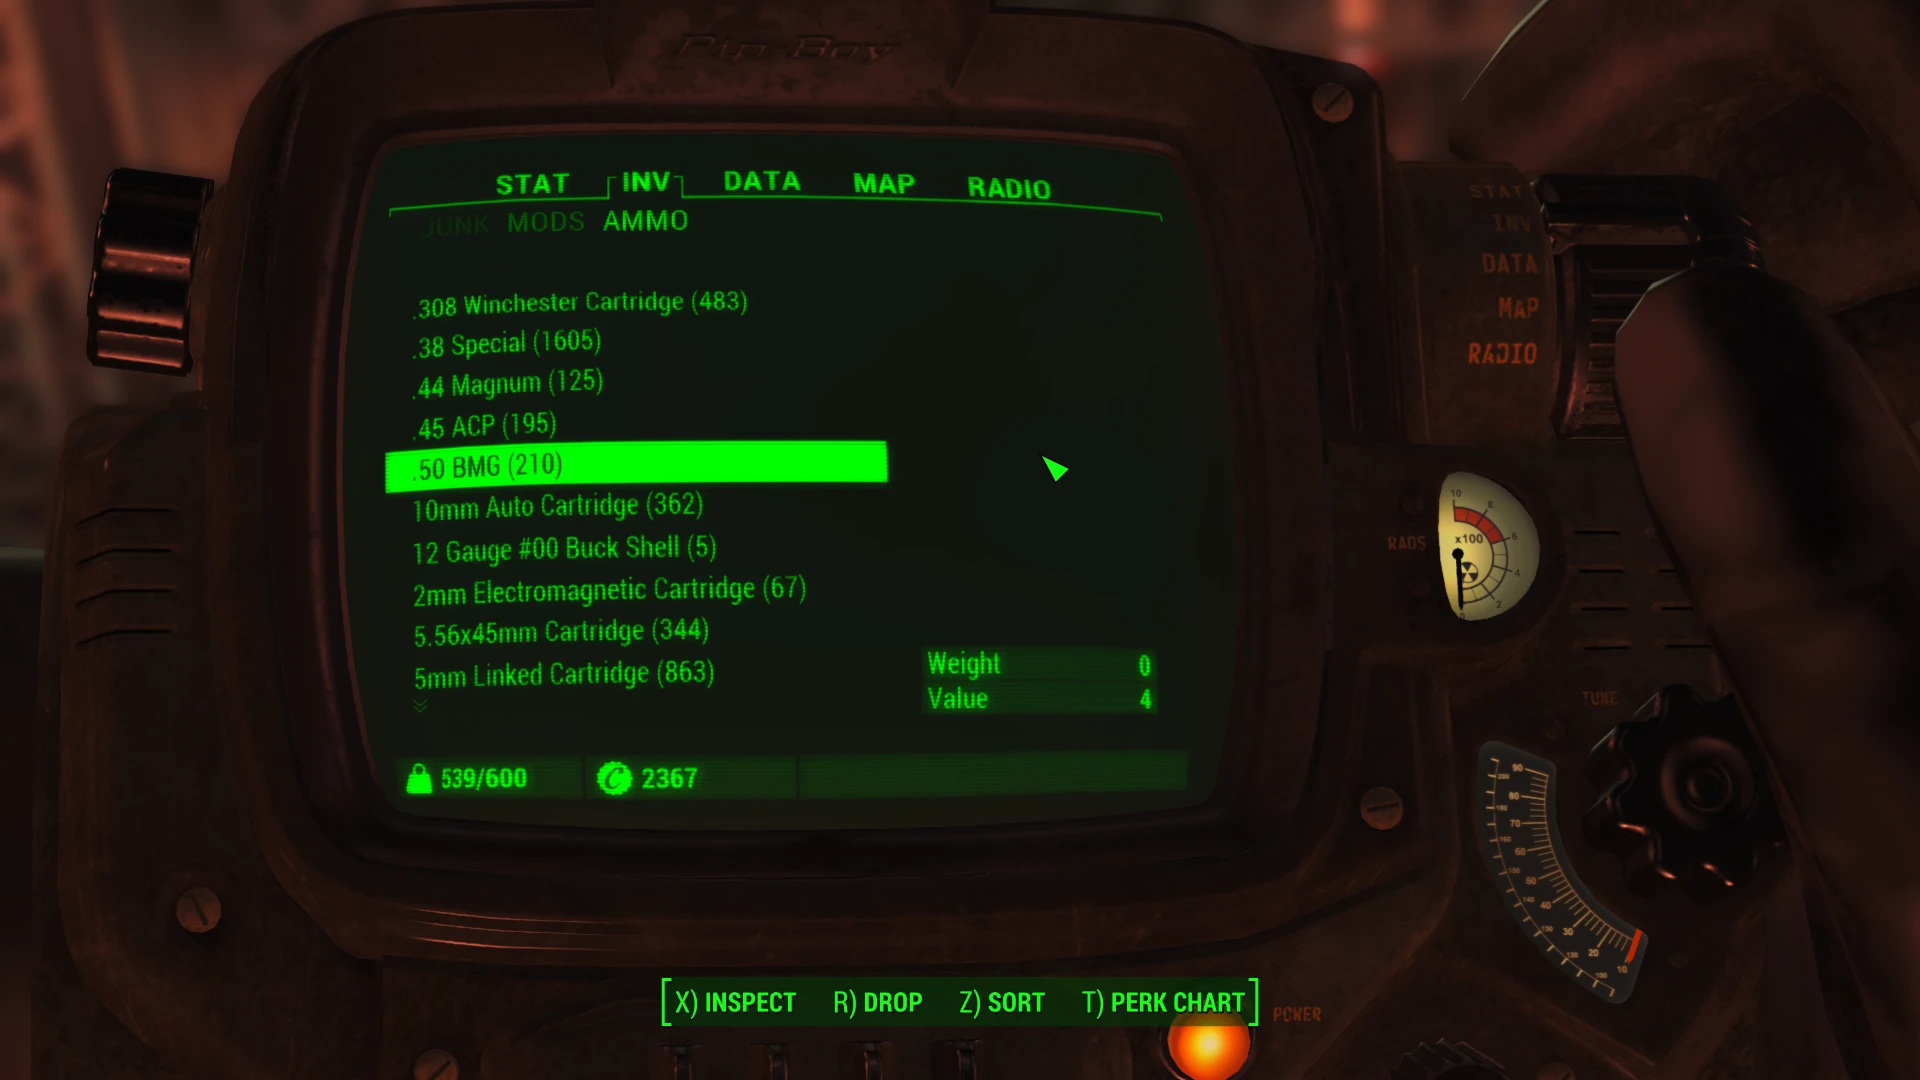 where can i find ammo in fallout 4